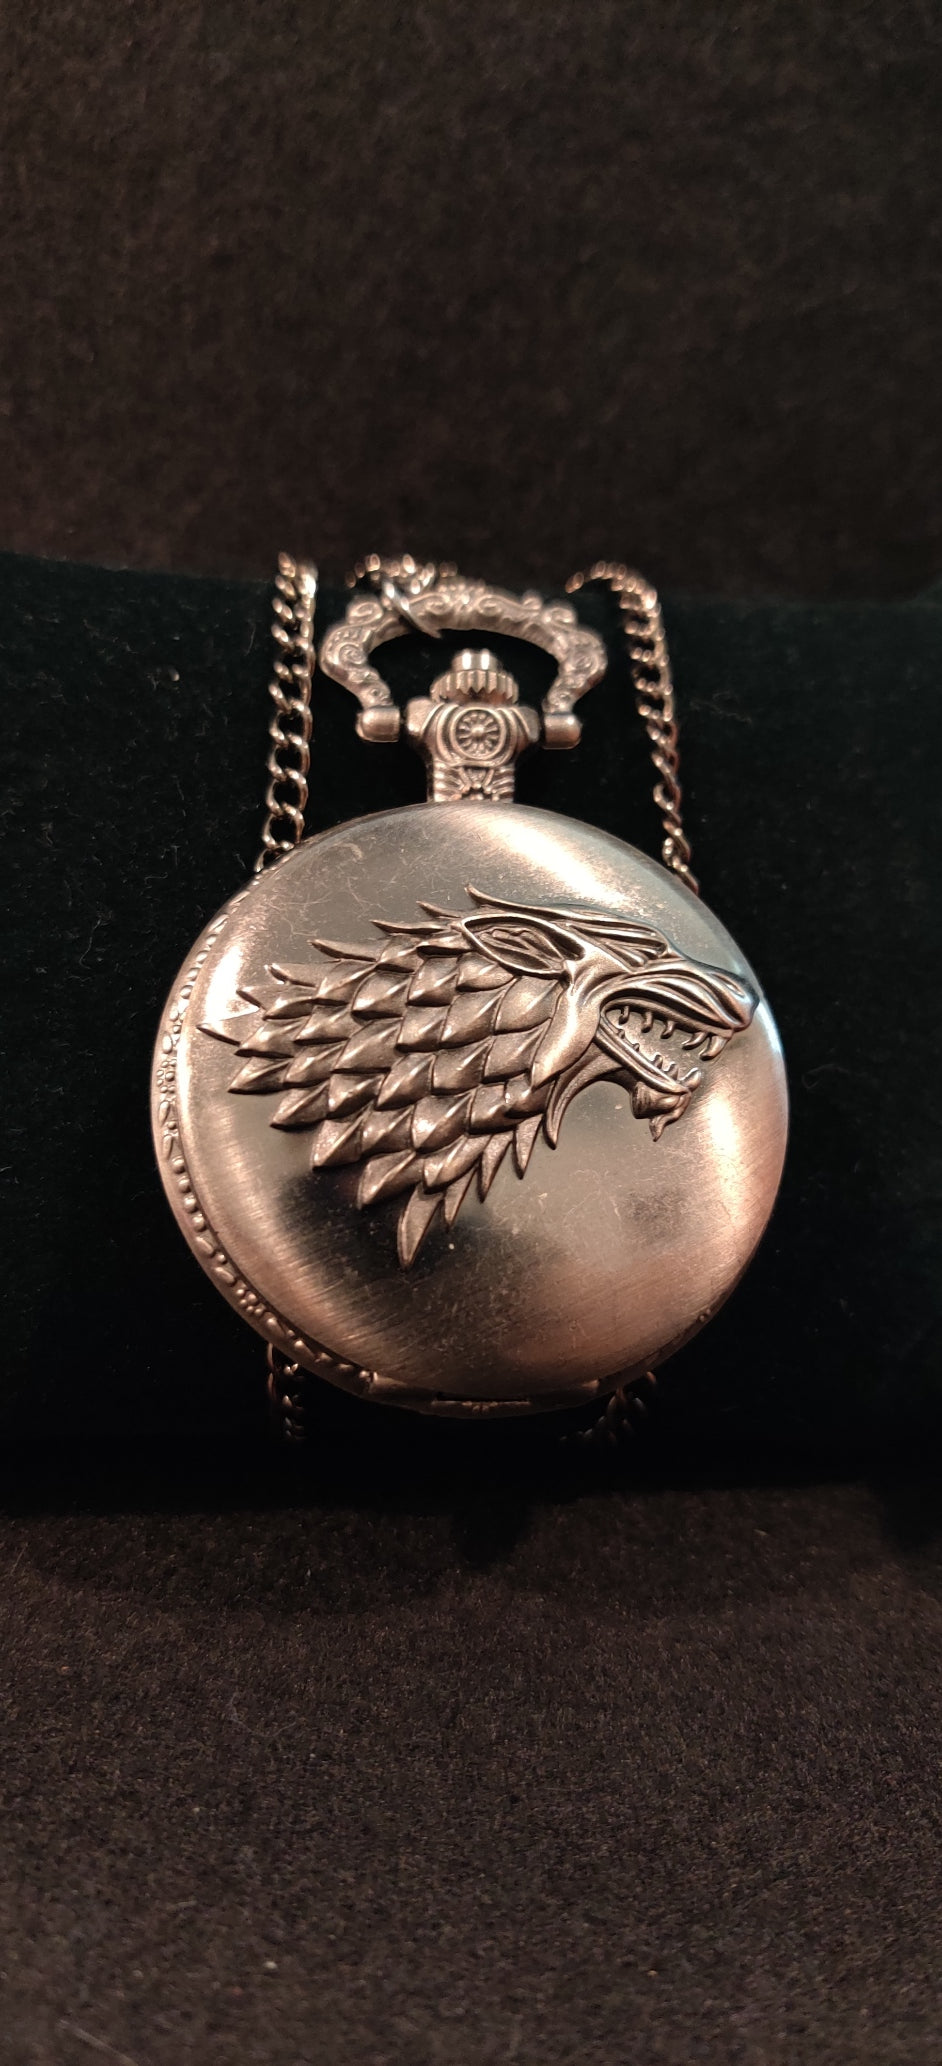 Game of Thrones Pocket Watch